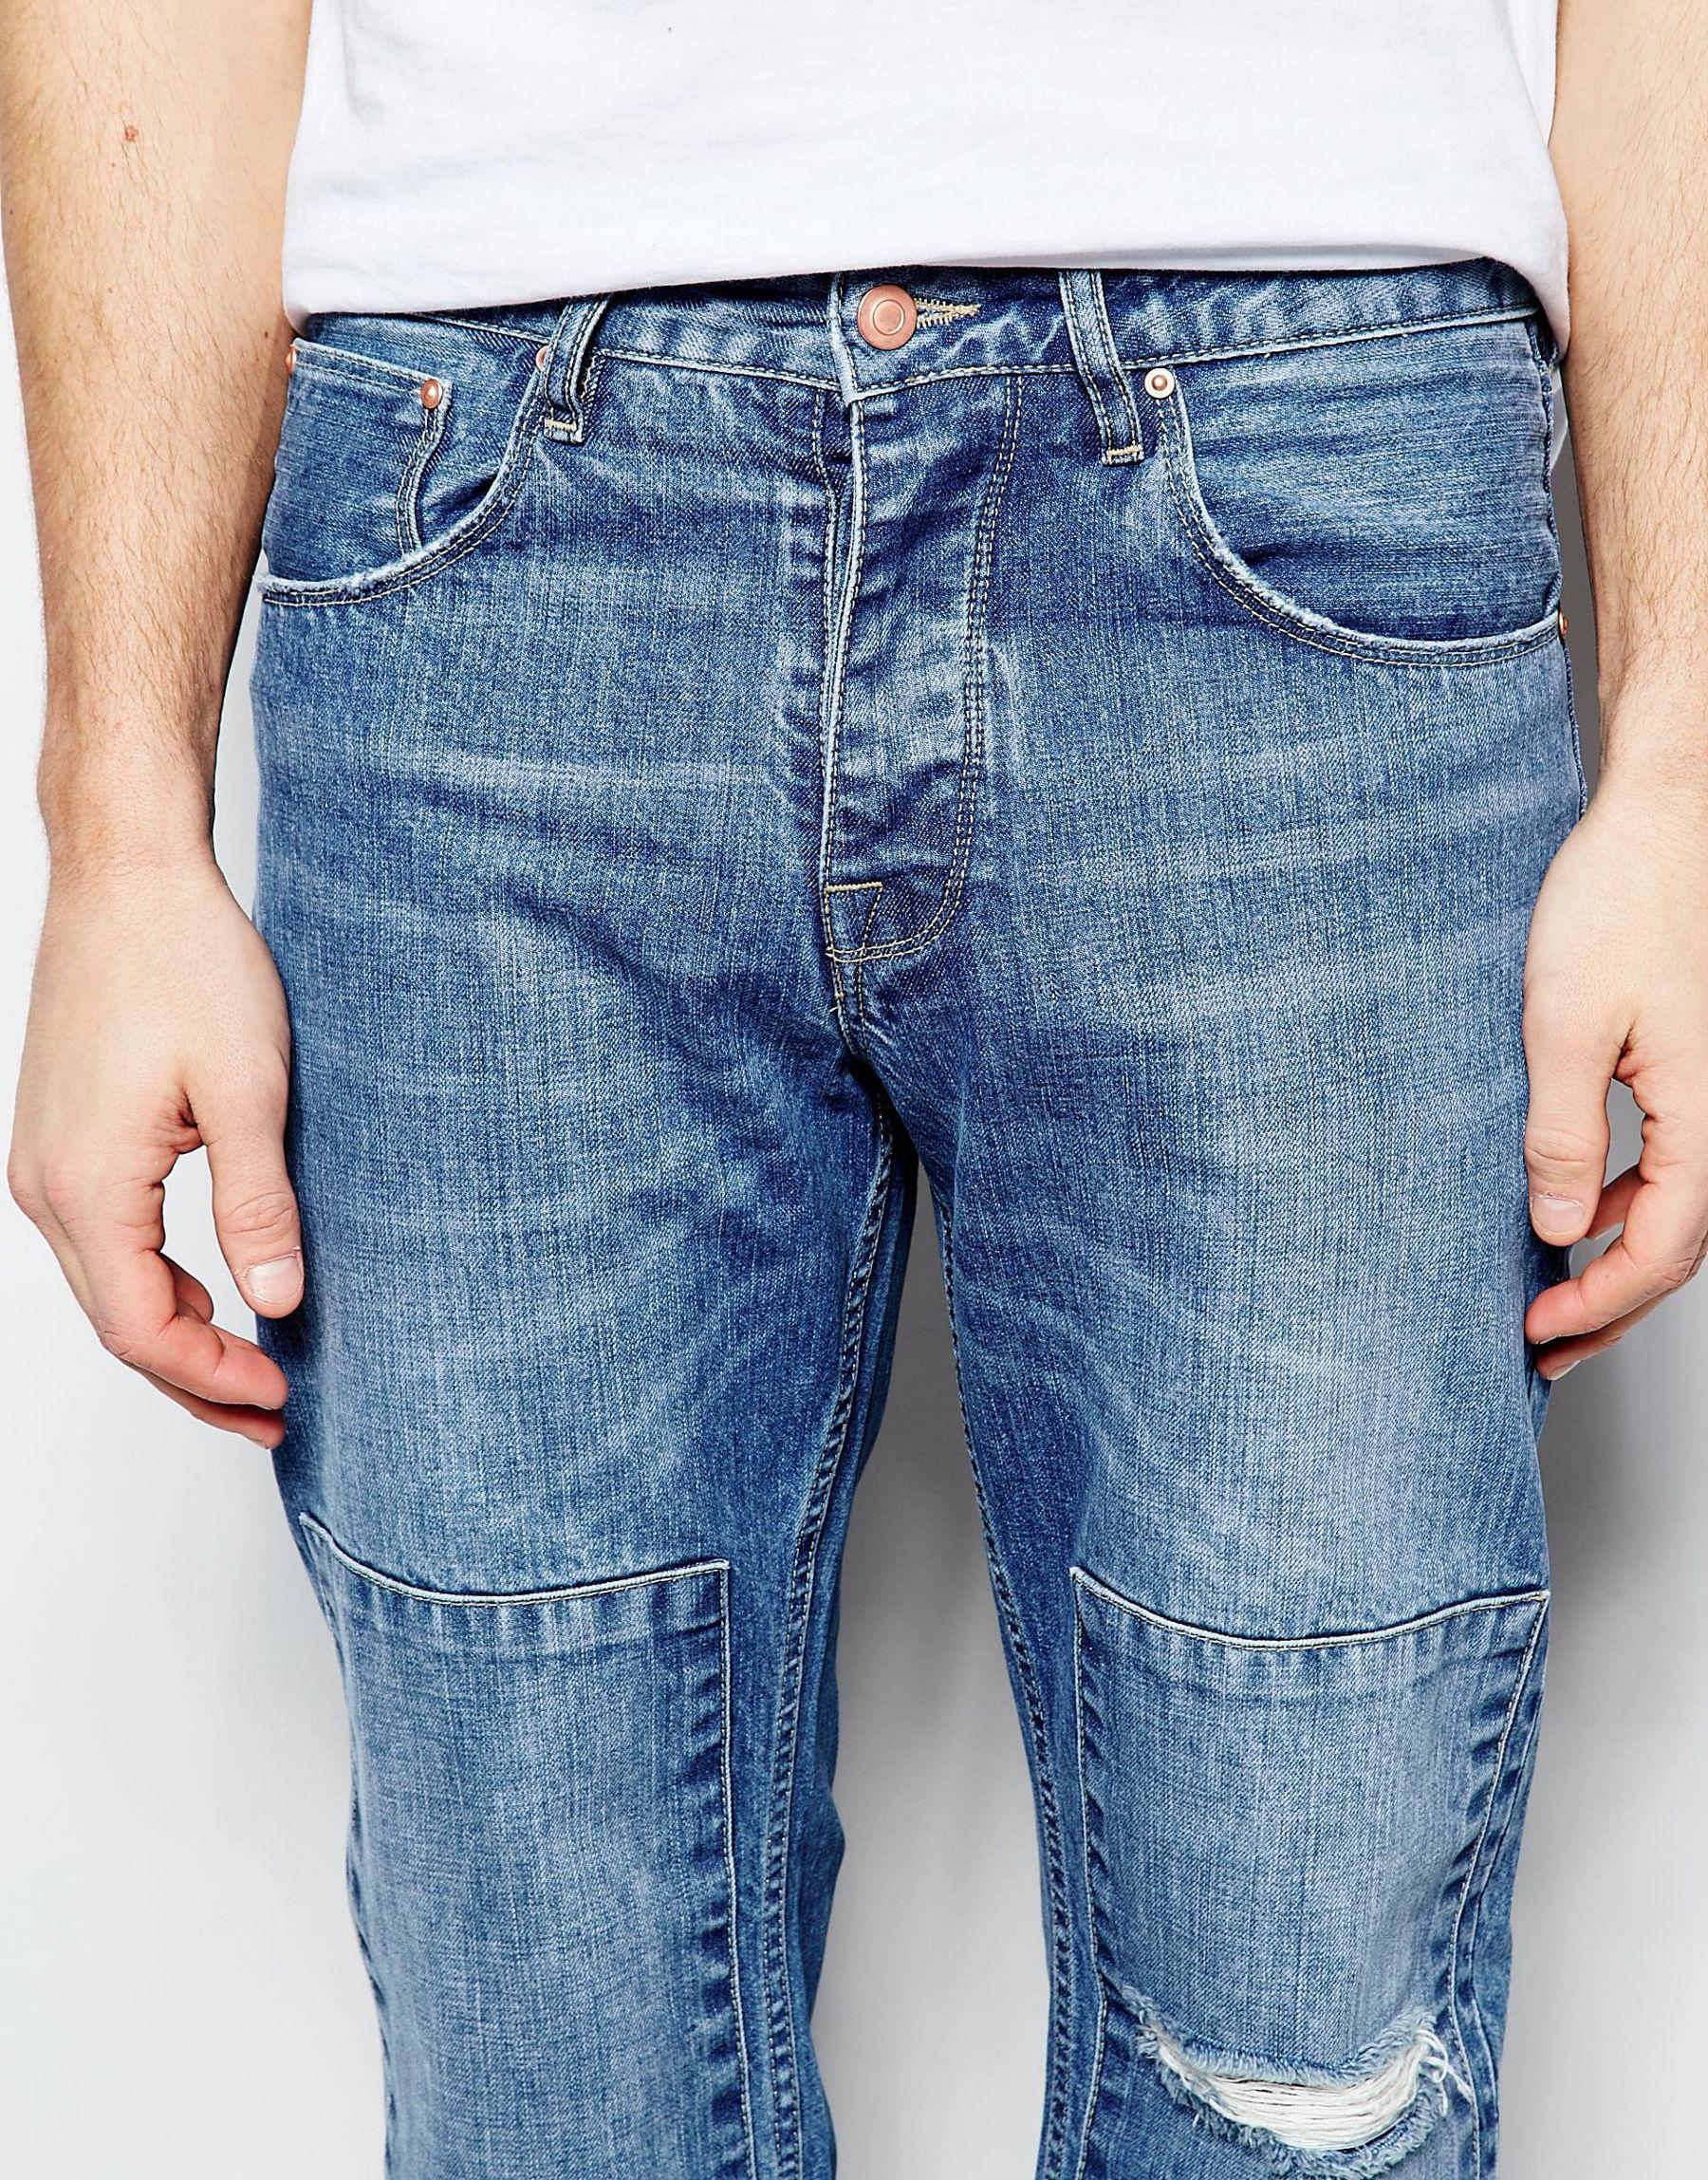 Lyst - Asos Straight Jeans In Cropped Length With Patches in Blue for Men